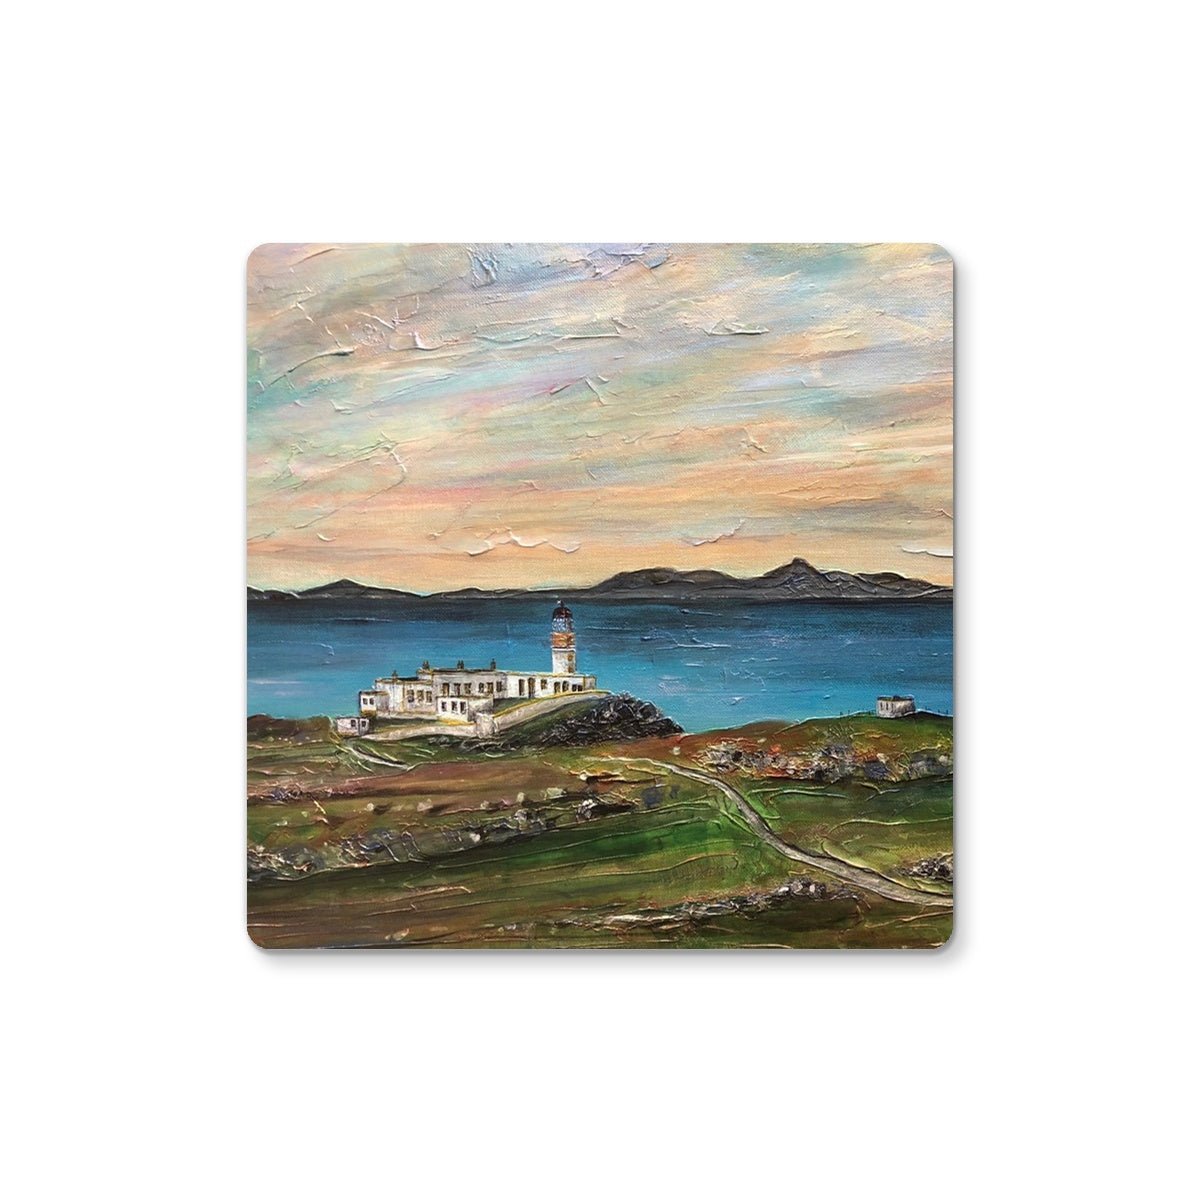 Neist Point Skye Art Gifts Coaster-Coasters-Skye Art Gallery-4 Coasters-Paintings, Prints, Homeware, Art Gifts From Scotland By Scottish Artist Kevin Hunter